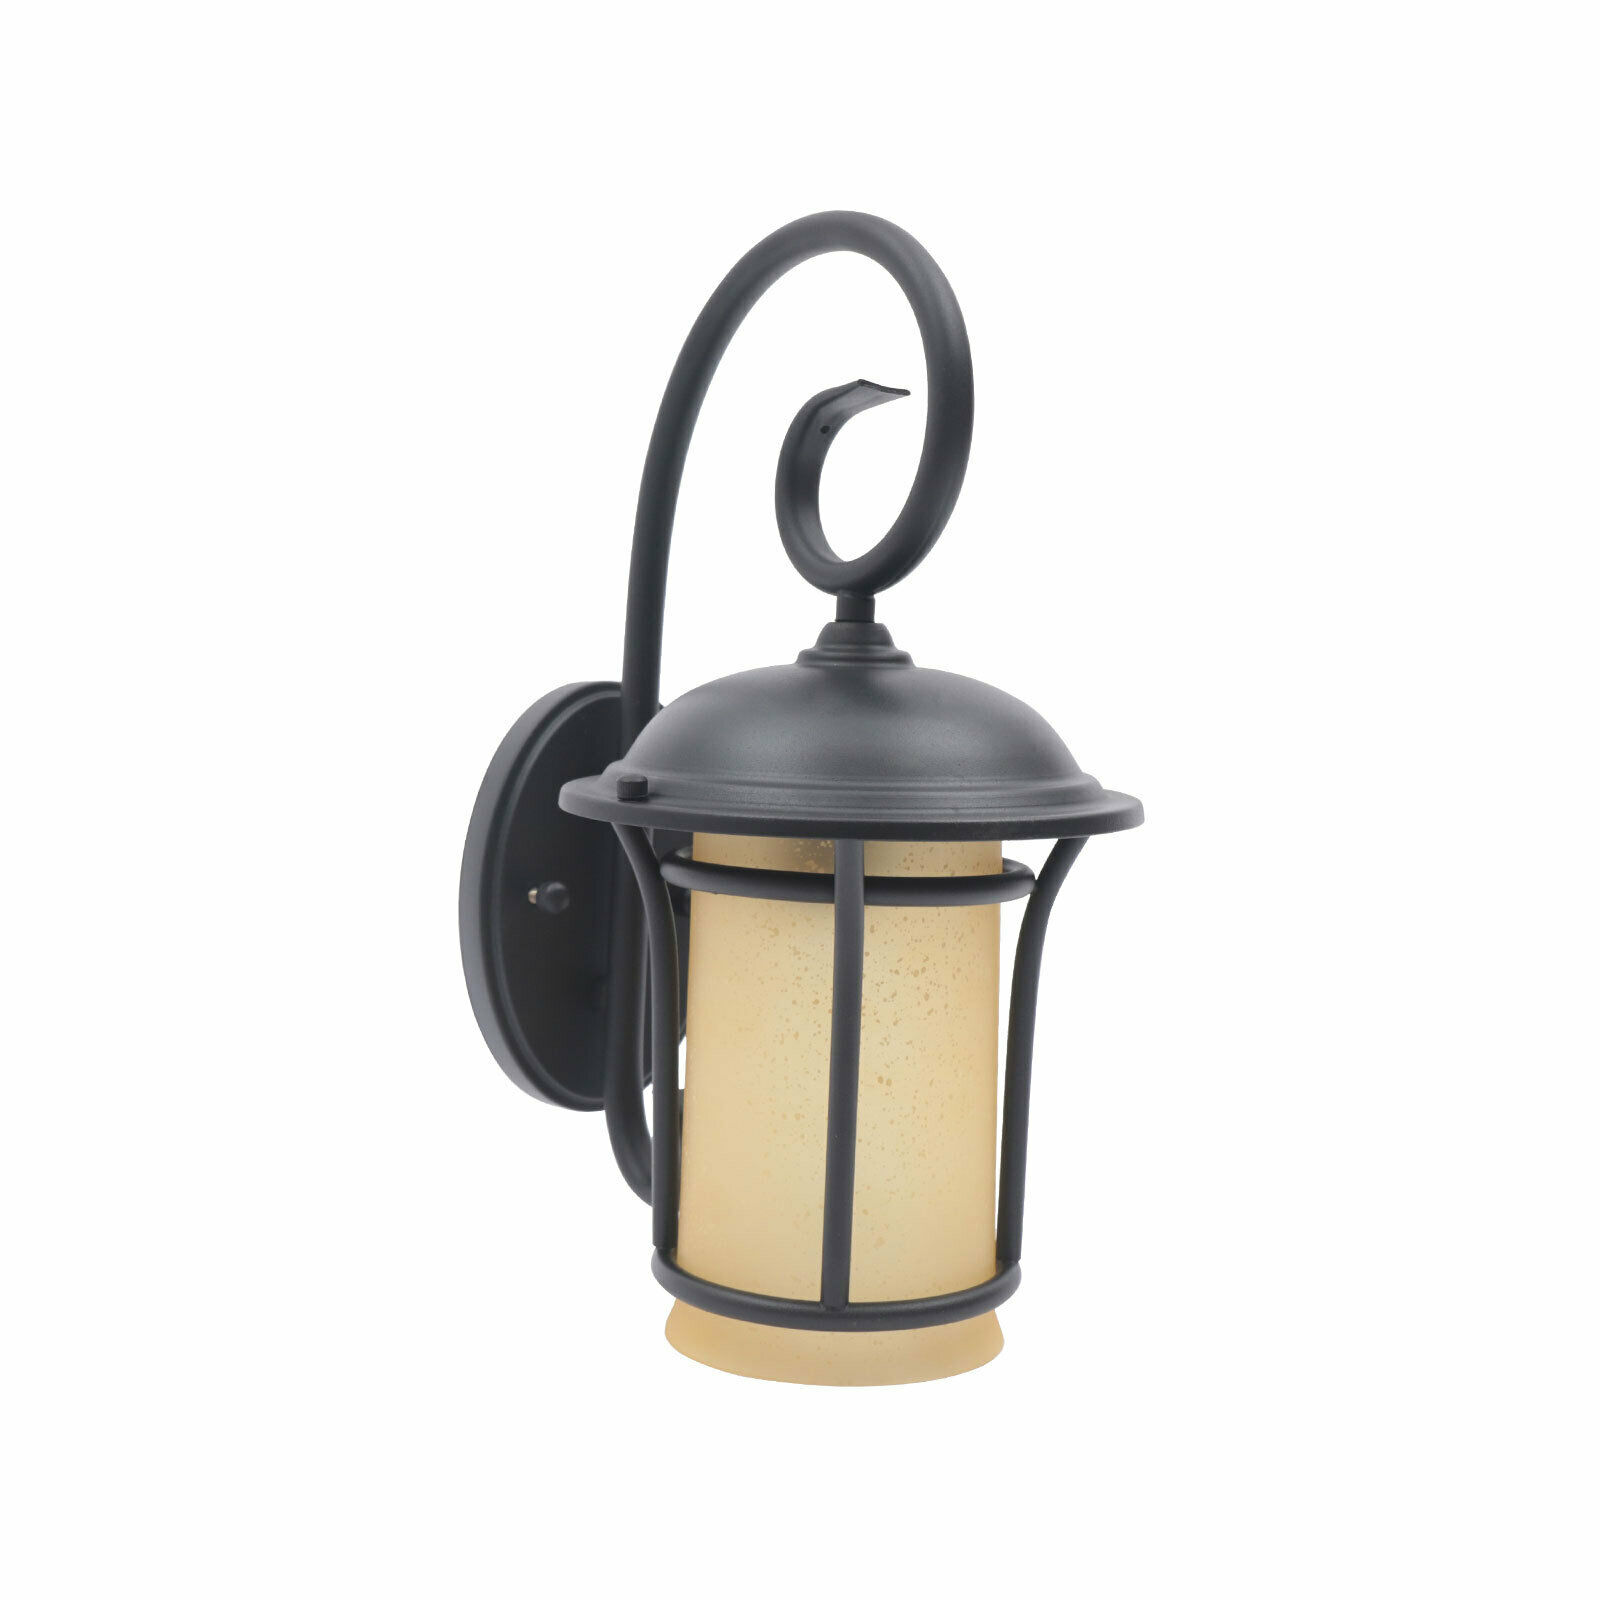 Exterior Wall Light Fixture Sconce Vintage Outdoor Retro Ground Glass Porch Lamp Outdoor Wall Light Exterior Wall Lantern Waterproof Sconce Porch Black Finshing Entryways Lighting Wall Mounted Lamp - image 5 of 10